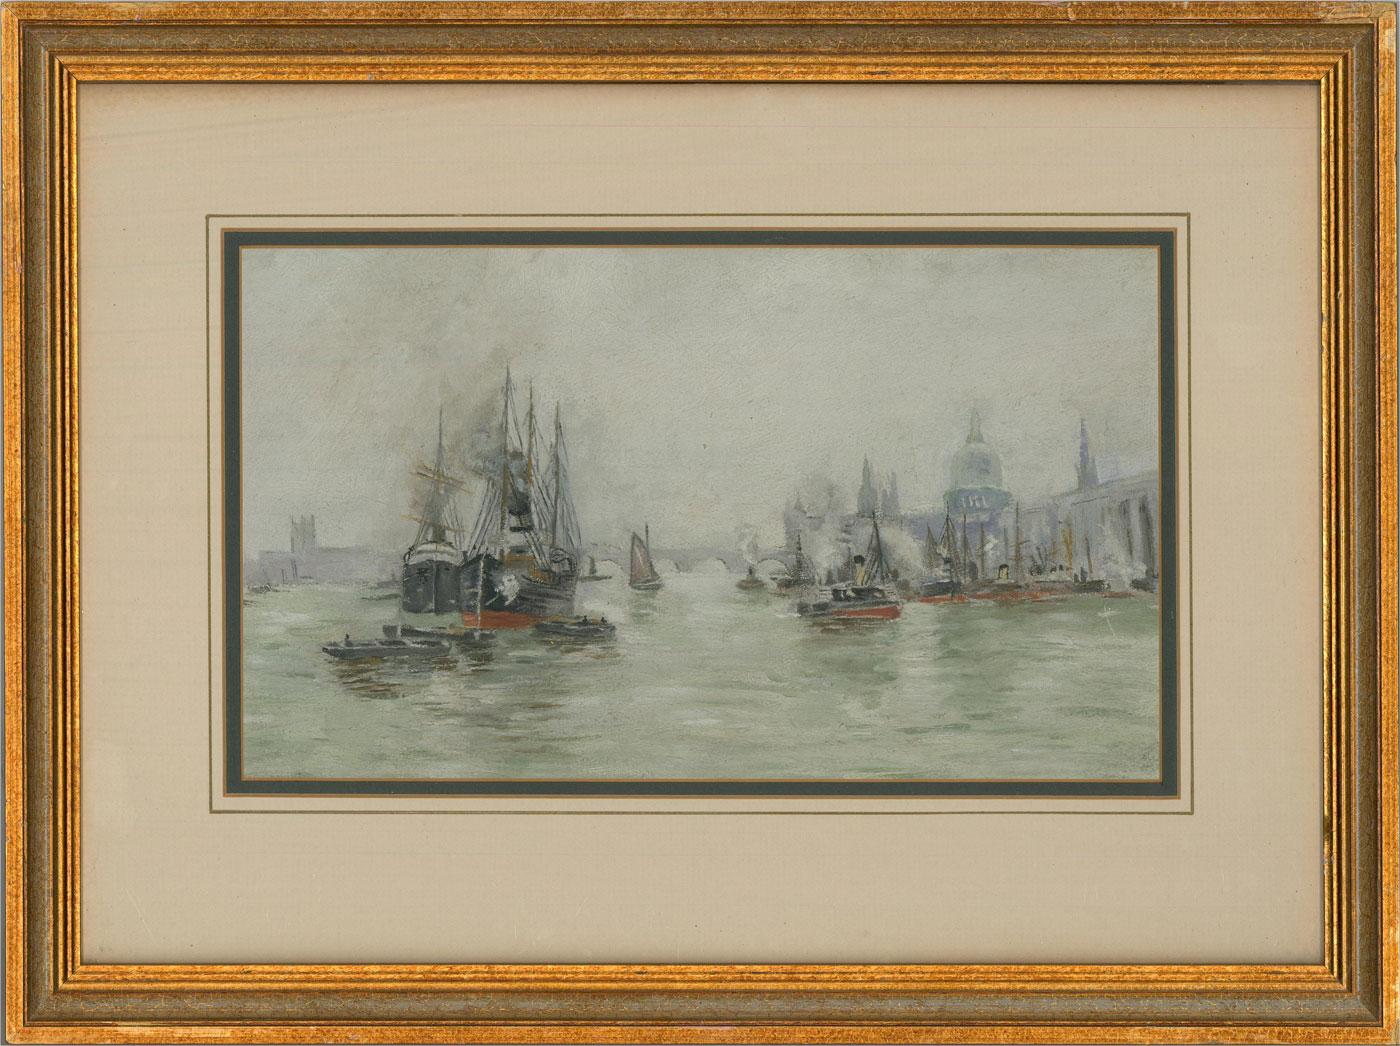 A fine impressionistic river scene showing steam boats chucking out smoke as they make their way down the Thames with St Paul's on the right. The painting has a naturalistic, industrial feel, similar to Lowry. The painting is unsigned and presented